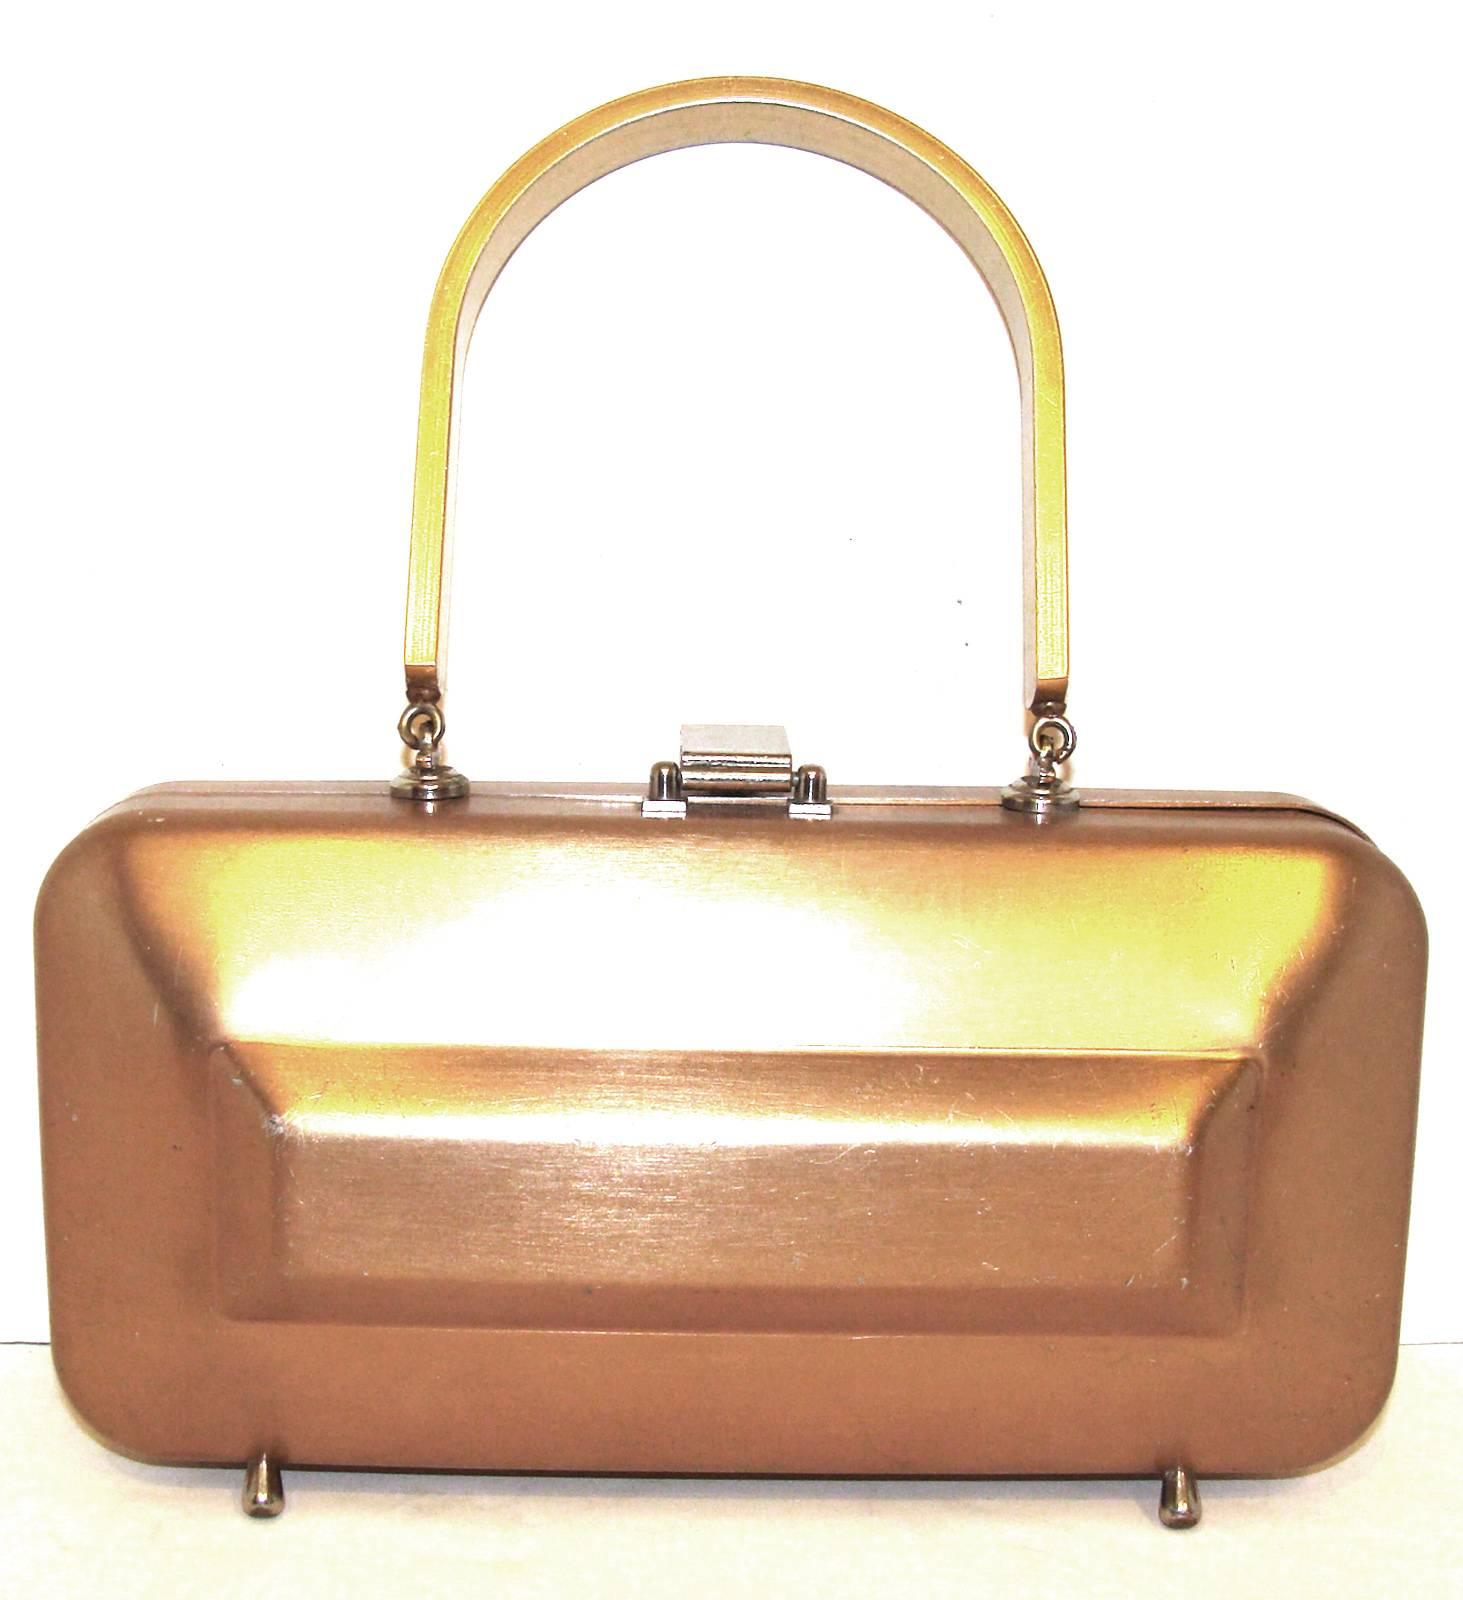 This is a sought after example for vintage bag collectors.  

This piece is a consignment from a longtime collector.  She is downsizing and has given us a great collection of iconic pieces to offer in our gallery.  This is the first one we are